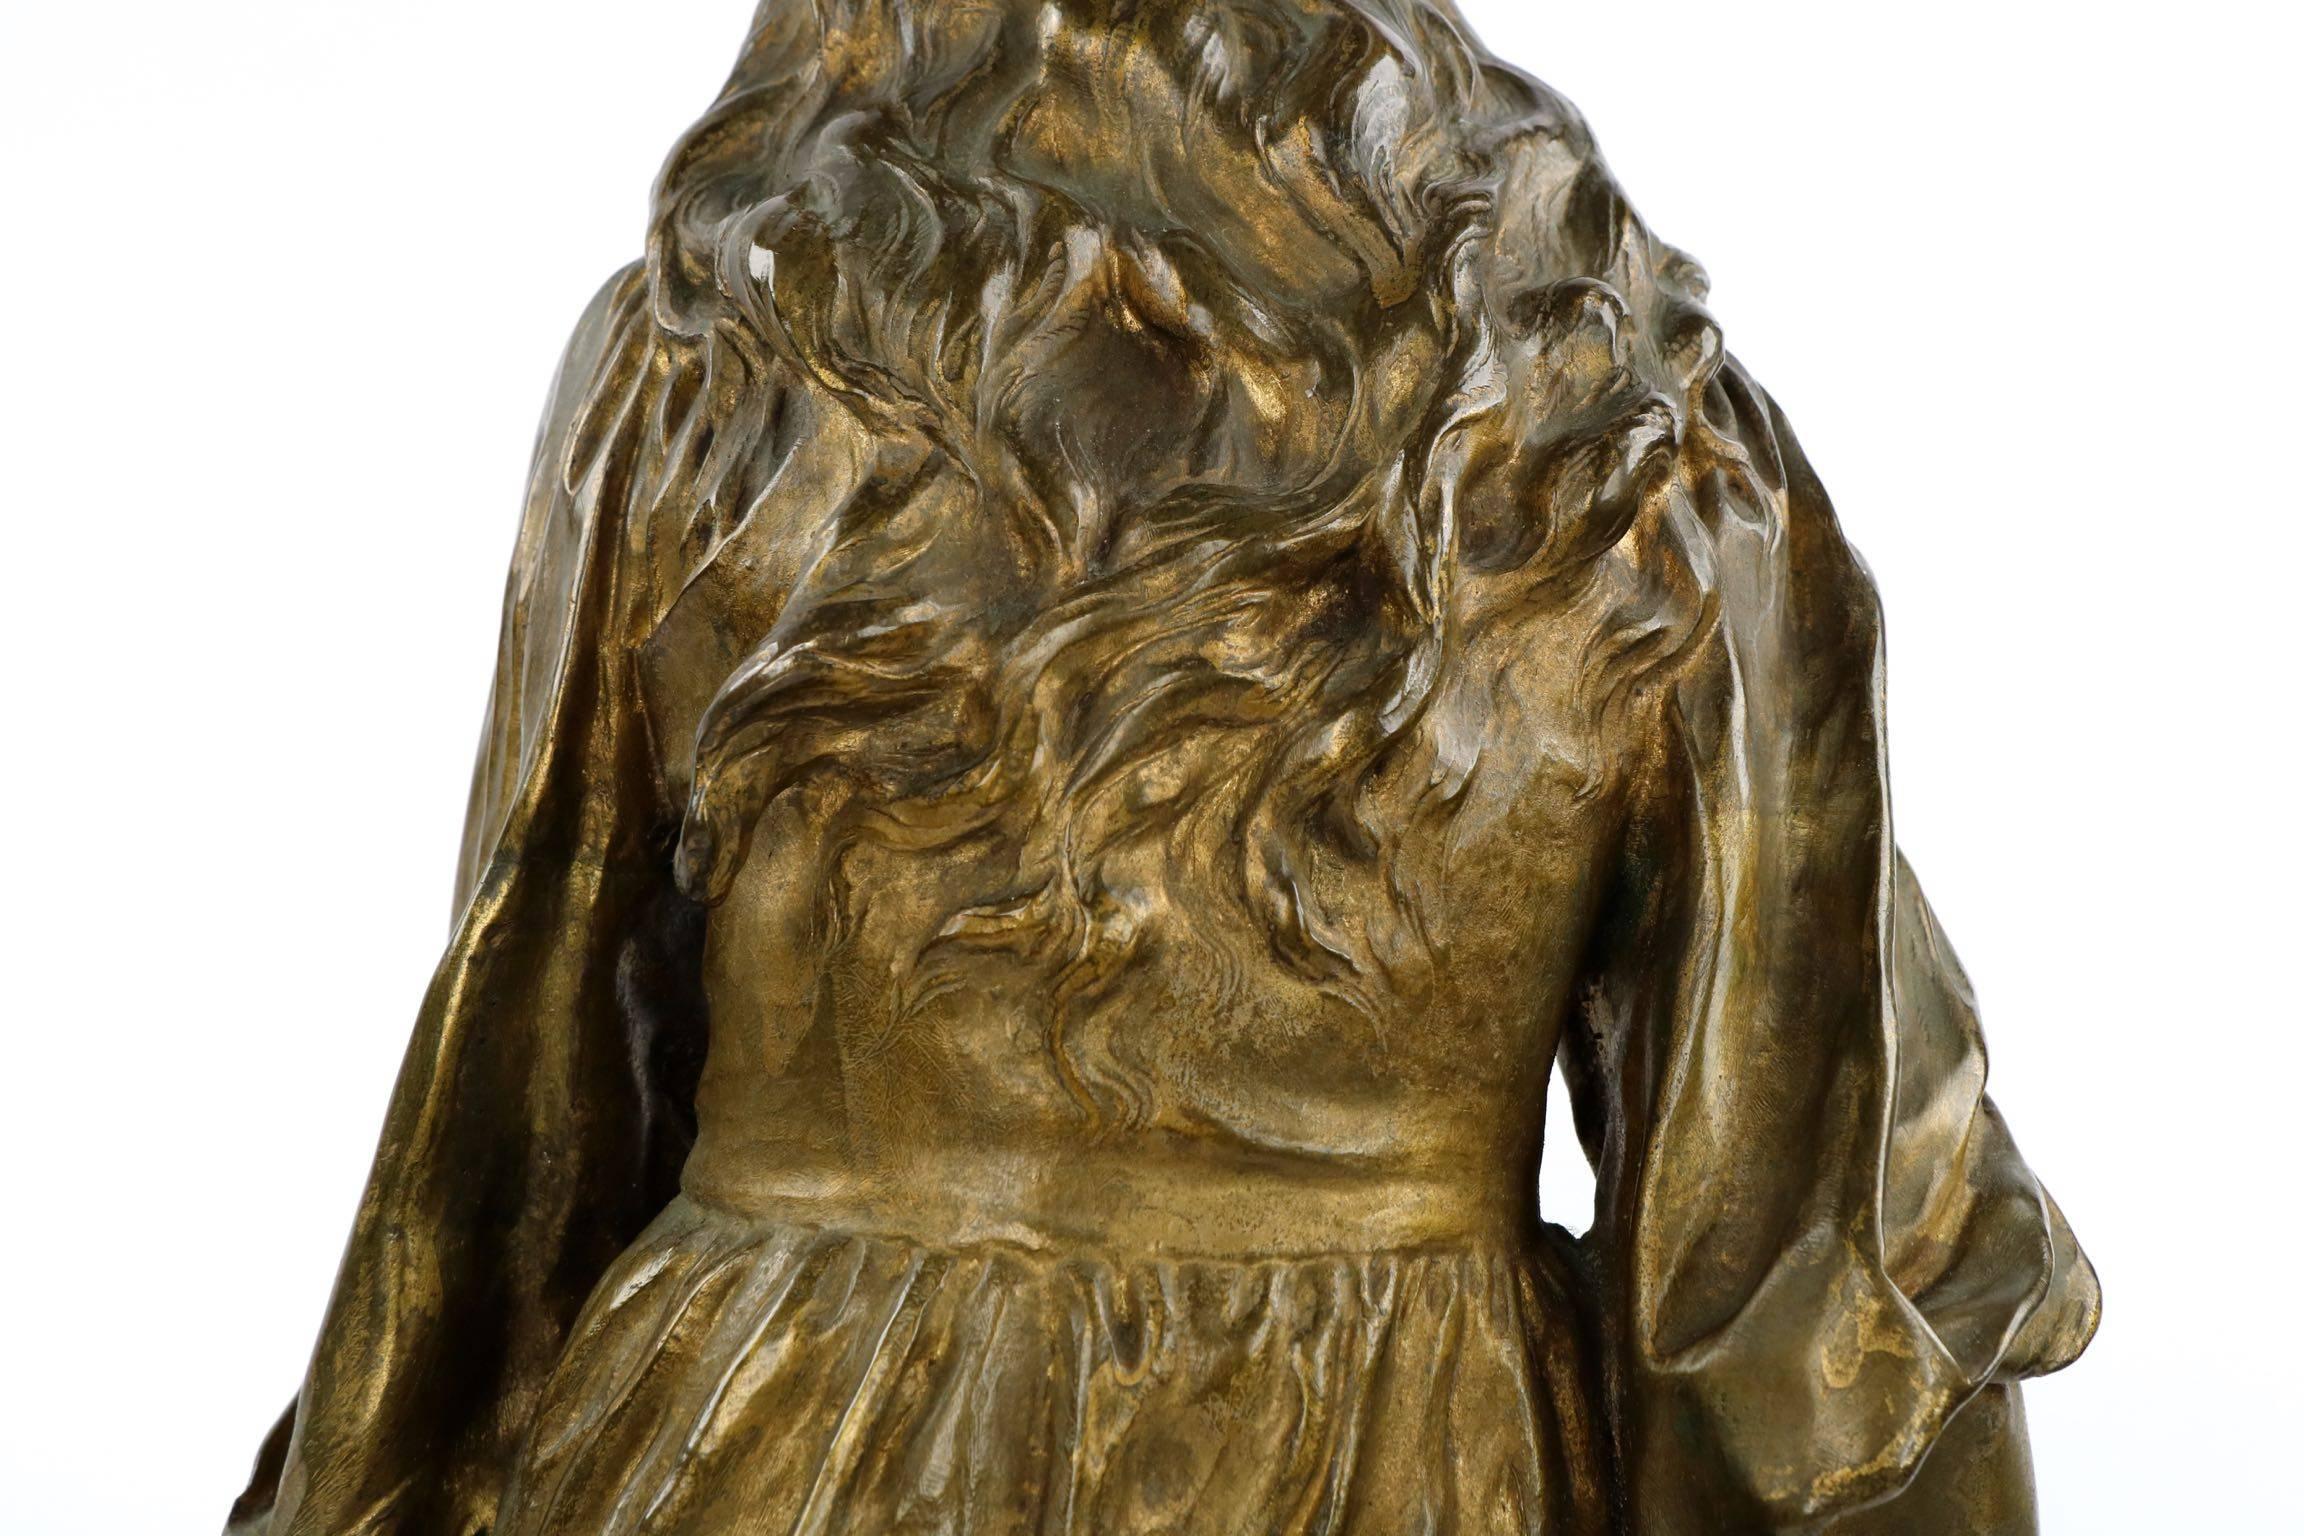 19th Century Paul Mengin (French, 1853-1937) Gilded Bronze Sculpture of Mignon by Susse